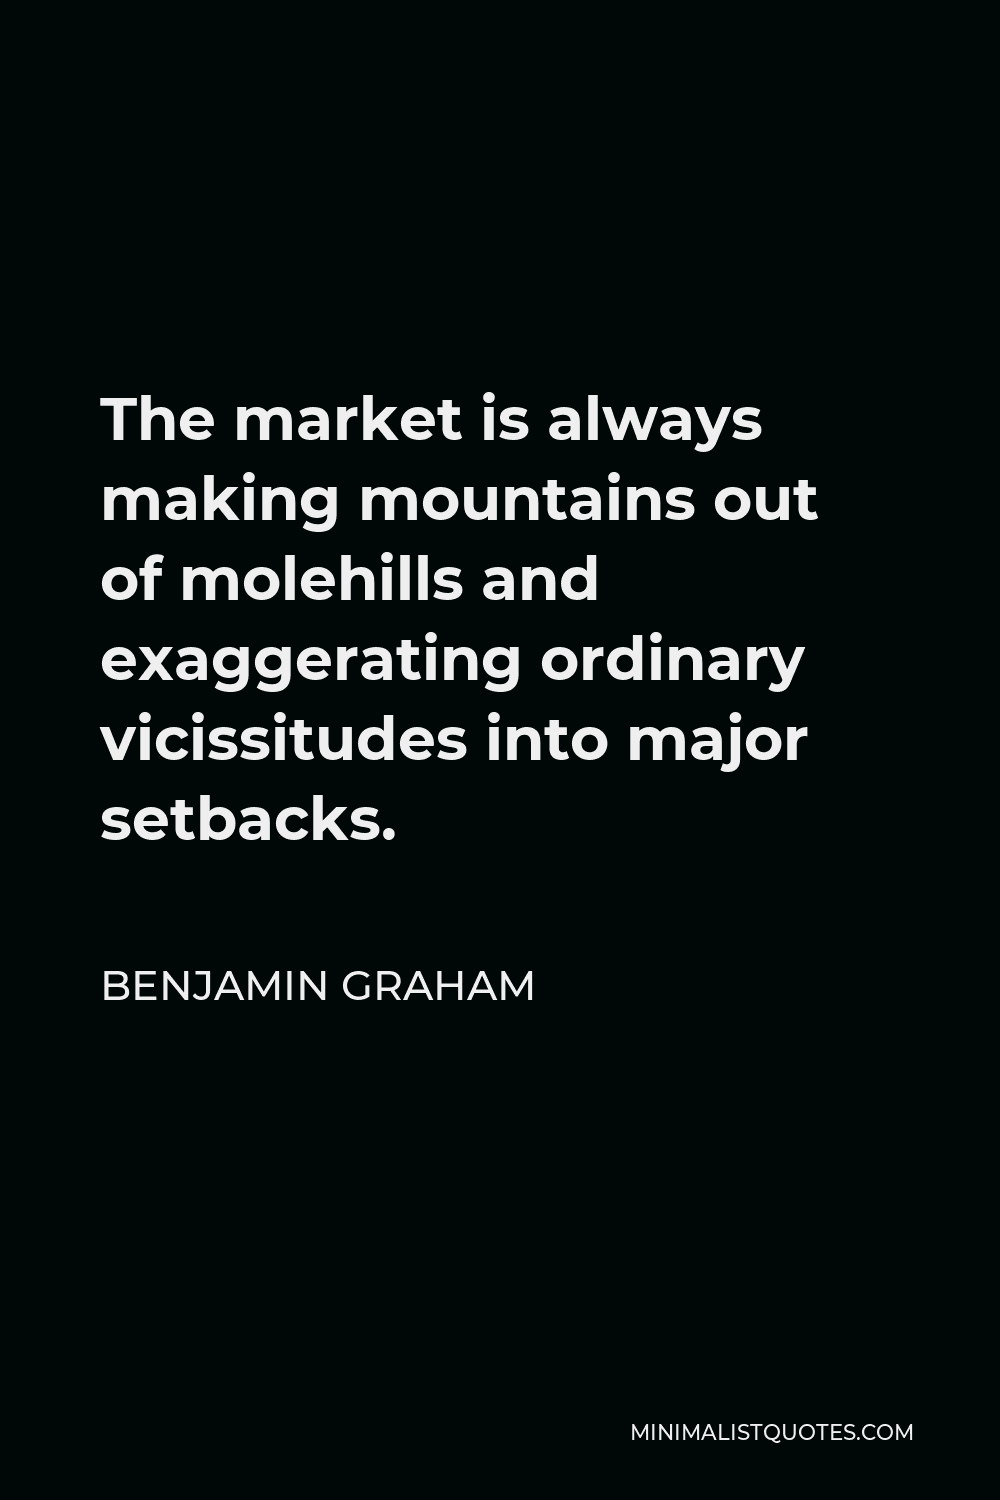 Benjamin Graham Quote - The market is always making mountains out of molehills and exaggerating ordinary vicissitudes into major setbacks.